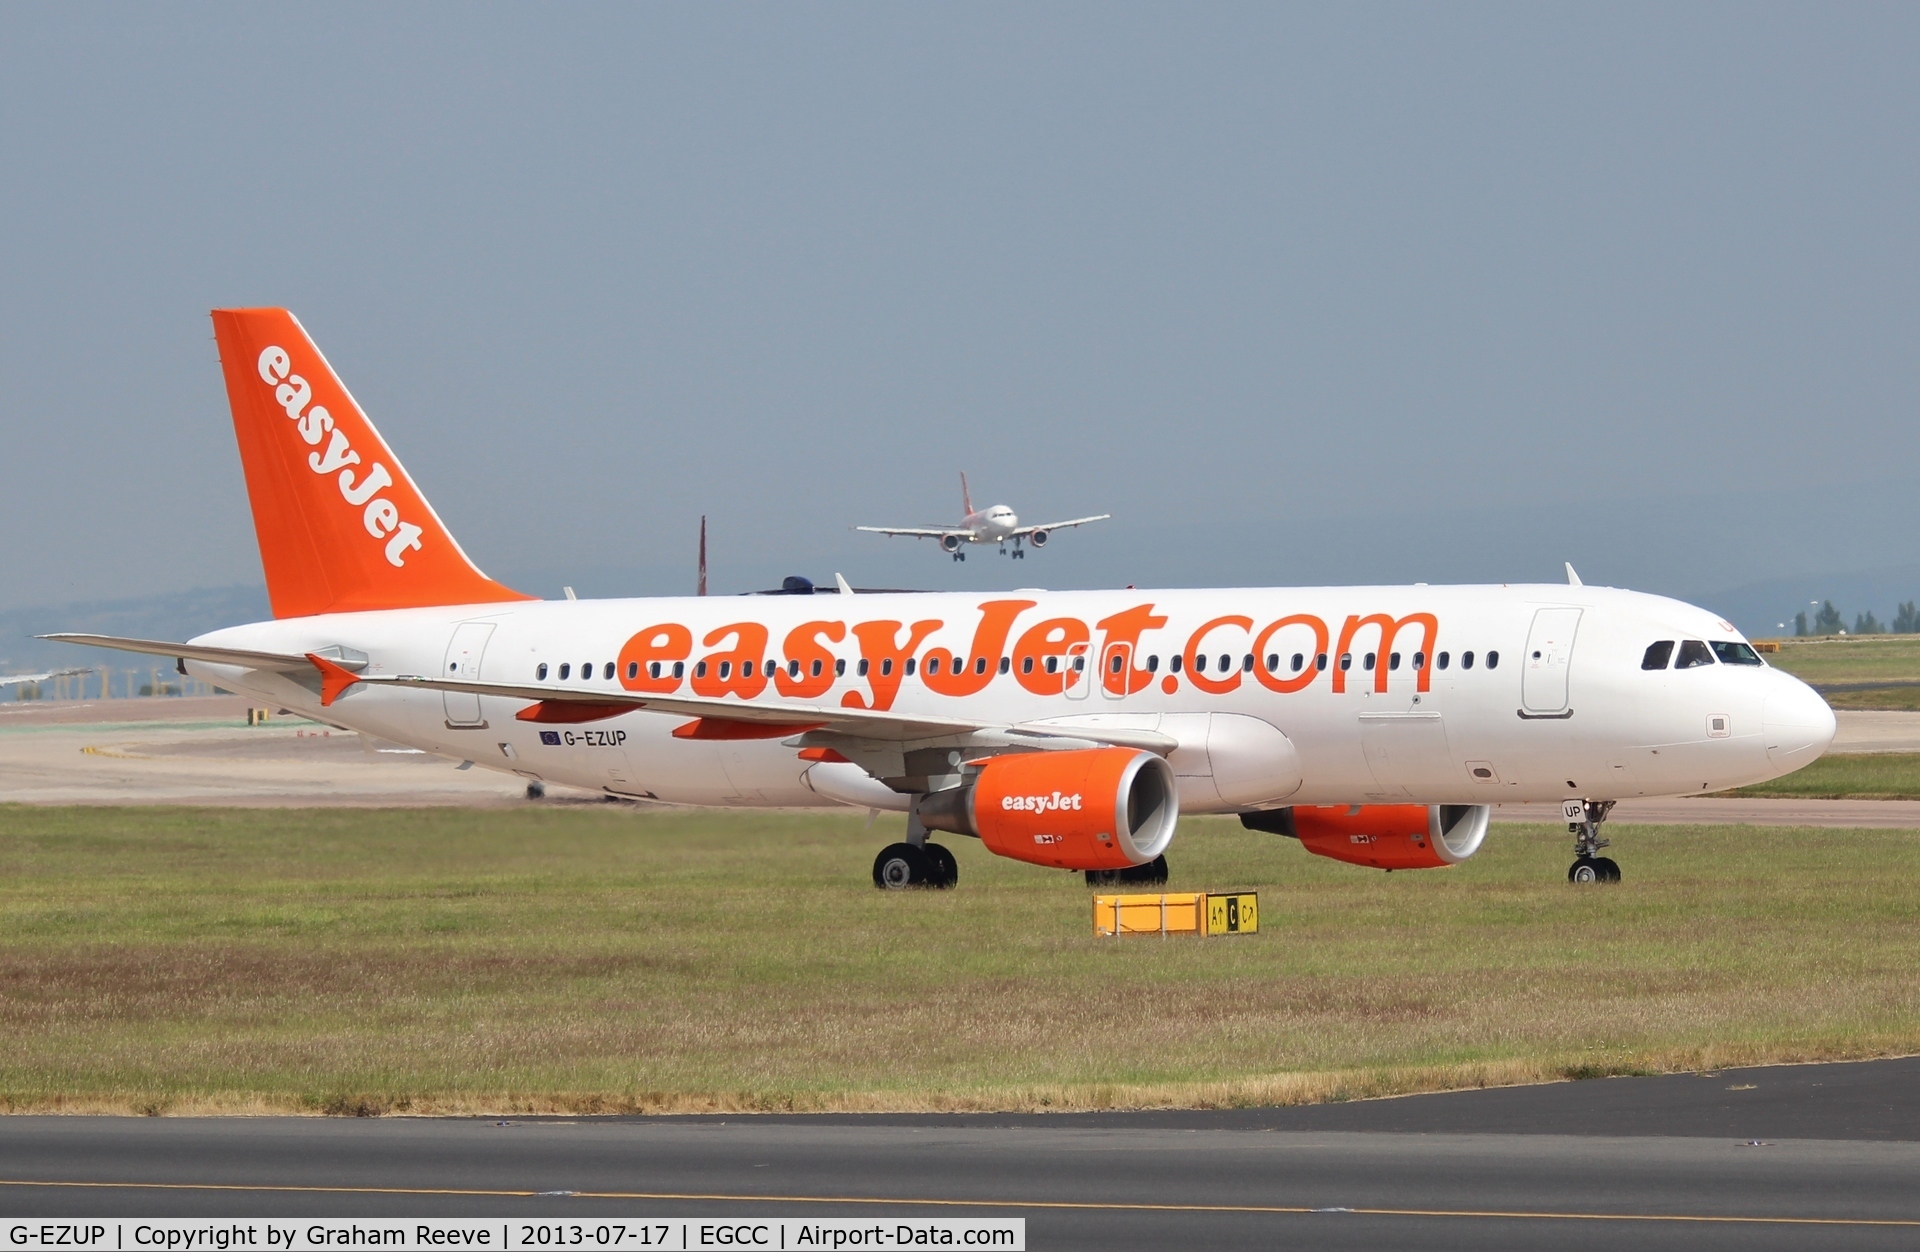 G-EZUP, 2012 Airbus A320-214 C/N 5056, Not on the grass but actually the taxi way.